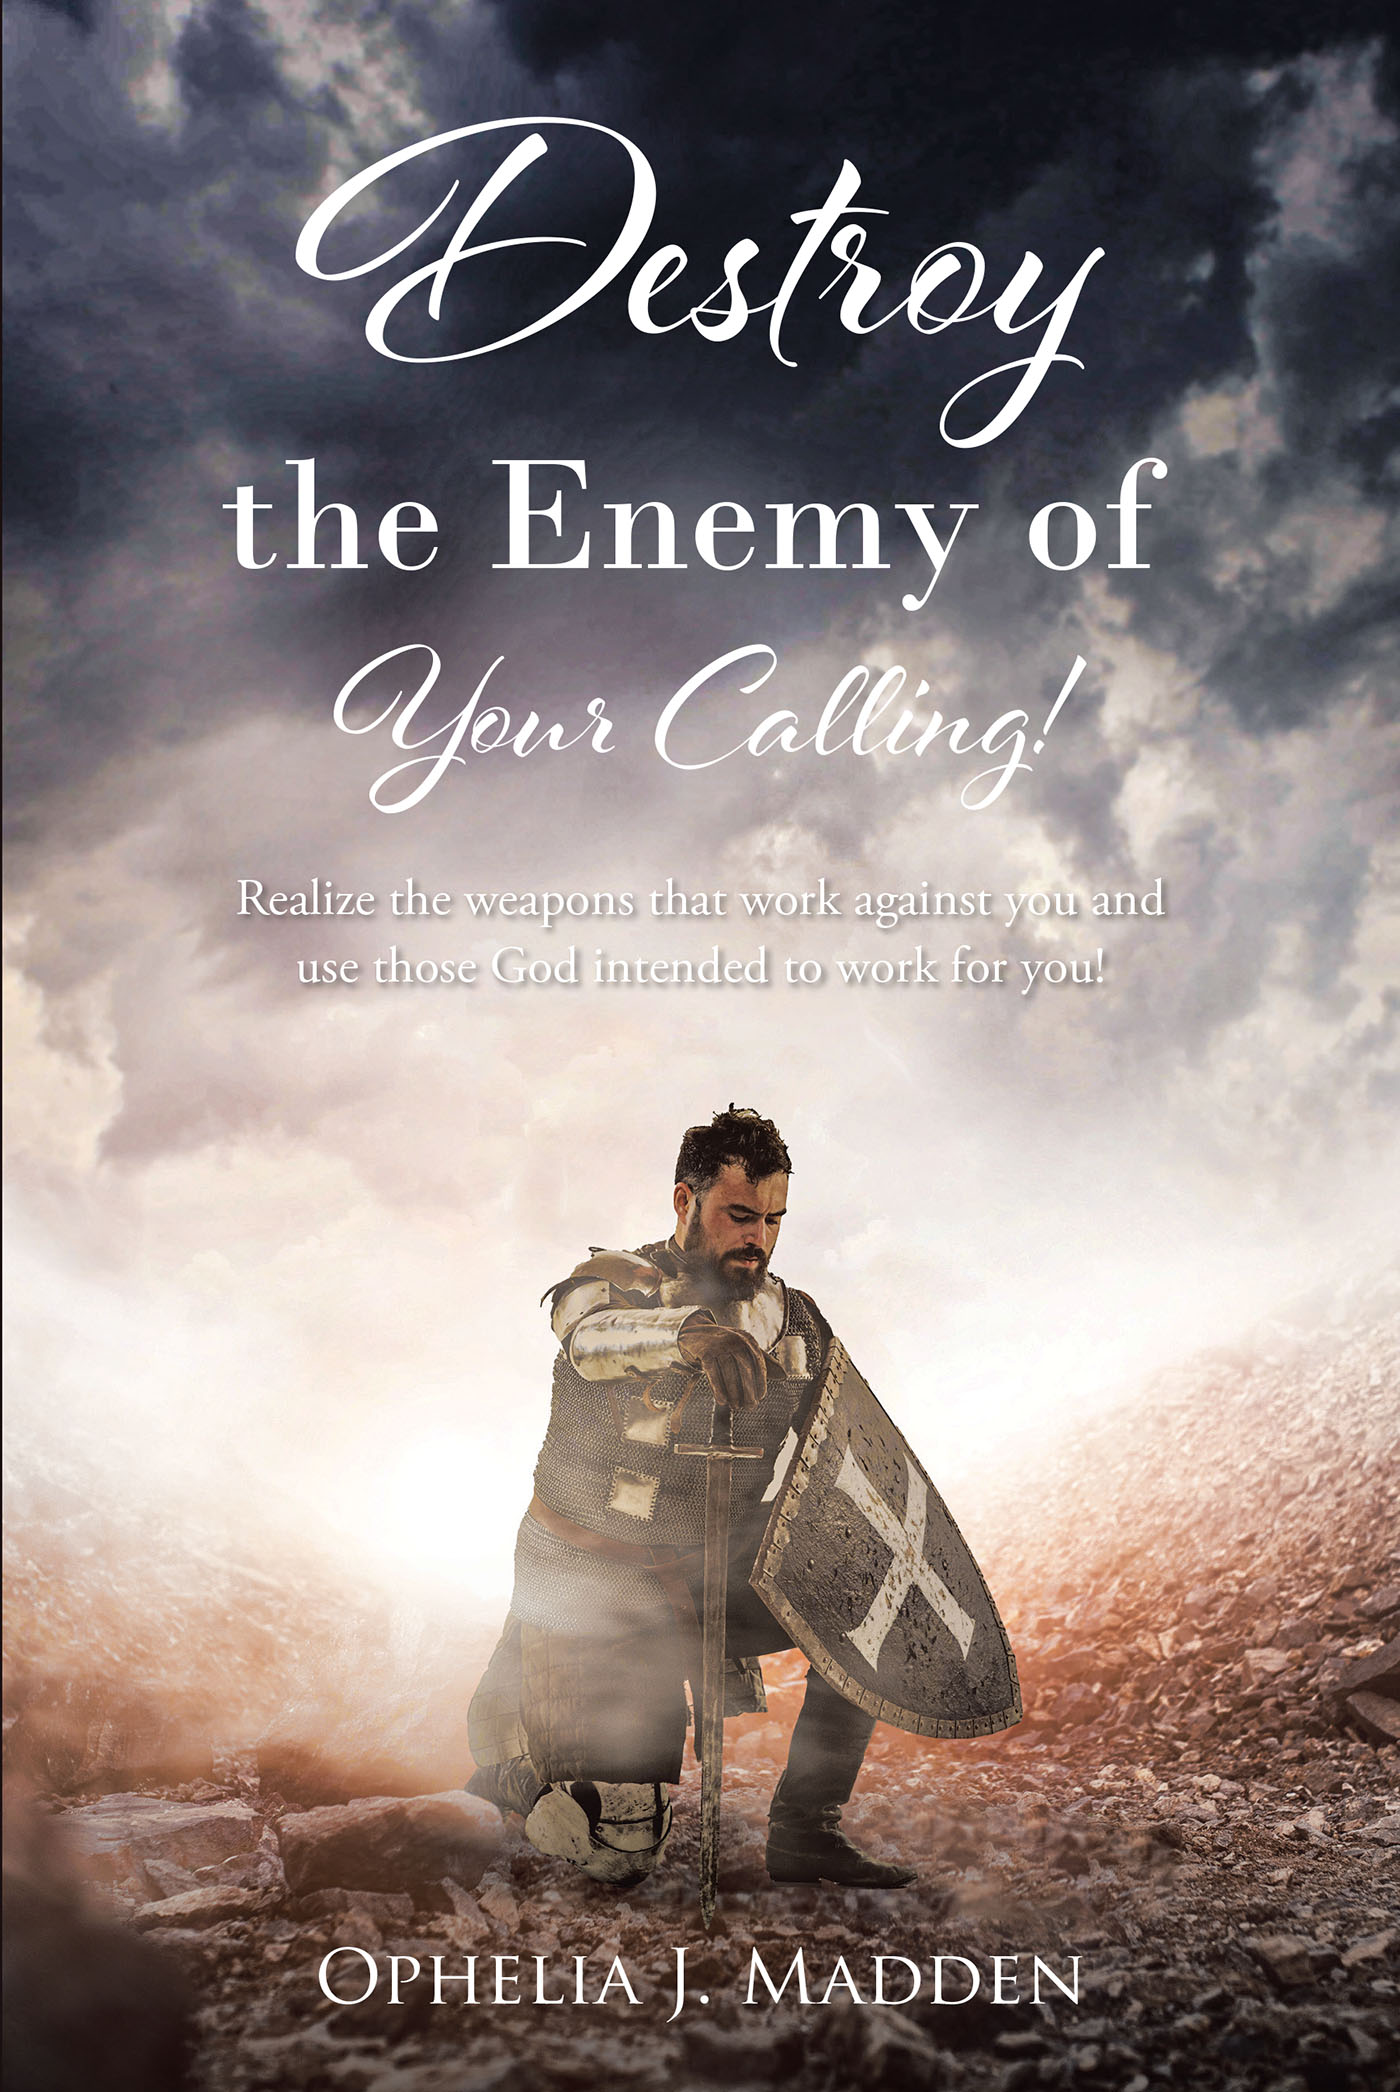 Ophelia J. Madden’s Newly Released "Destroy the Enemy of Your Calling!" is a Powerful Reminder of the Strength God Provides